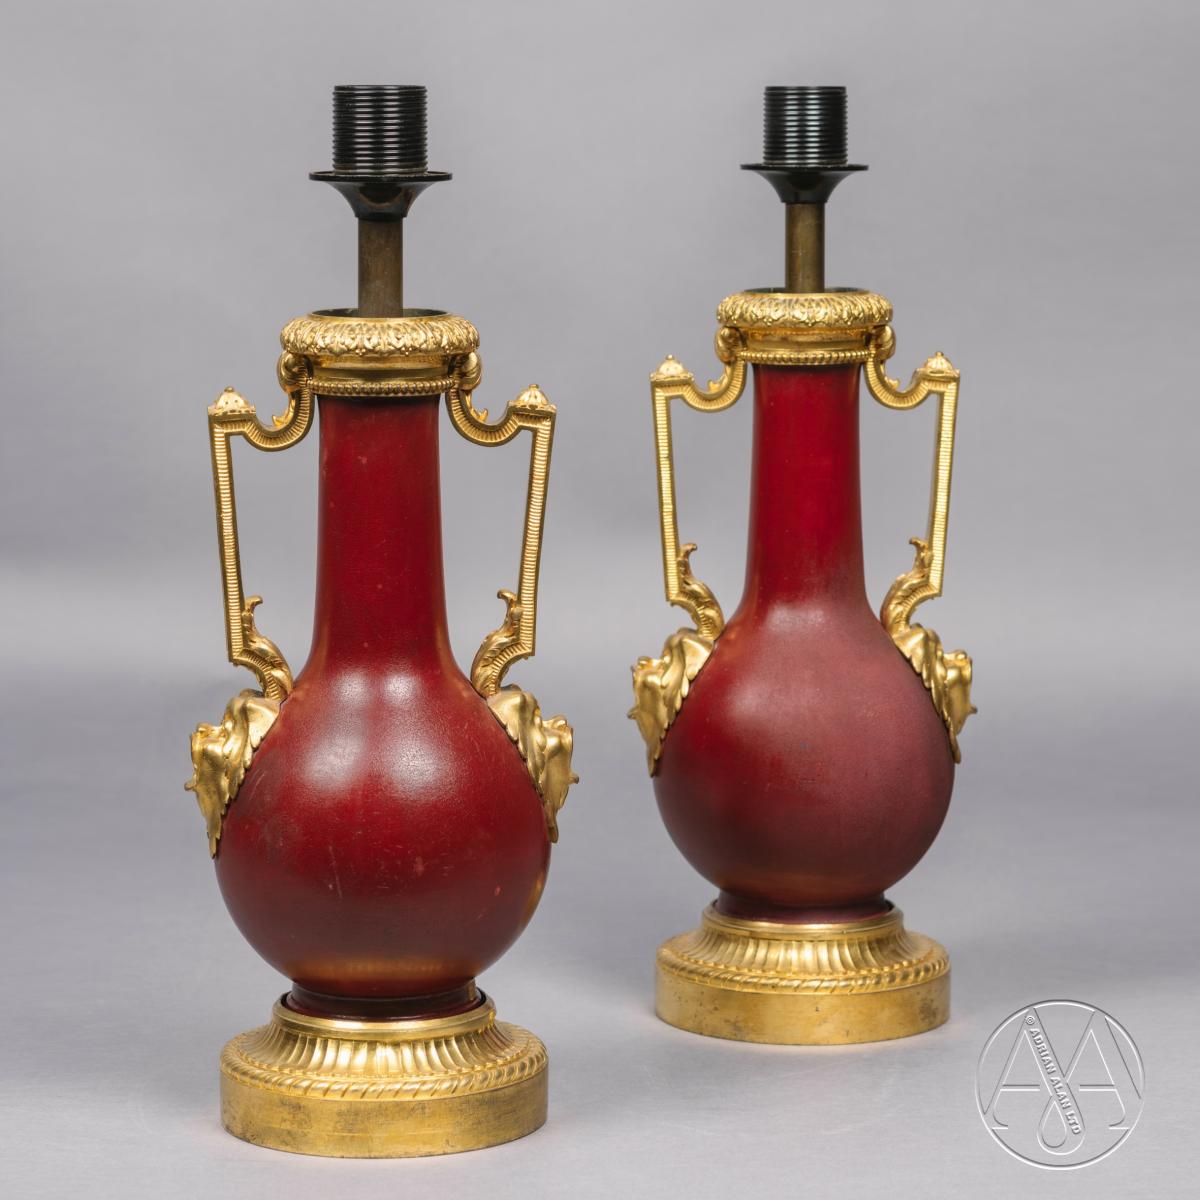 A Pair of Gilt-Bronze Mounted Red Lacquer Vases Adapted as Table Lamps